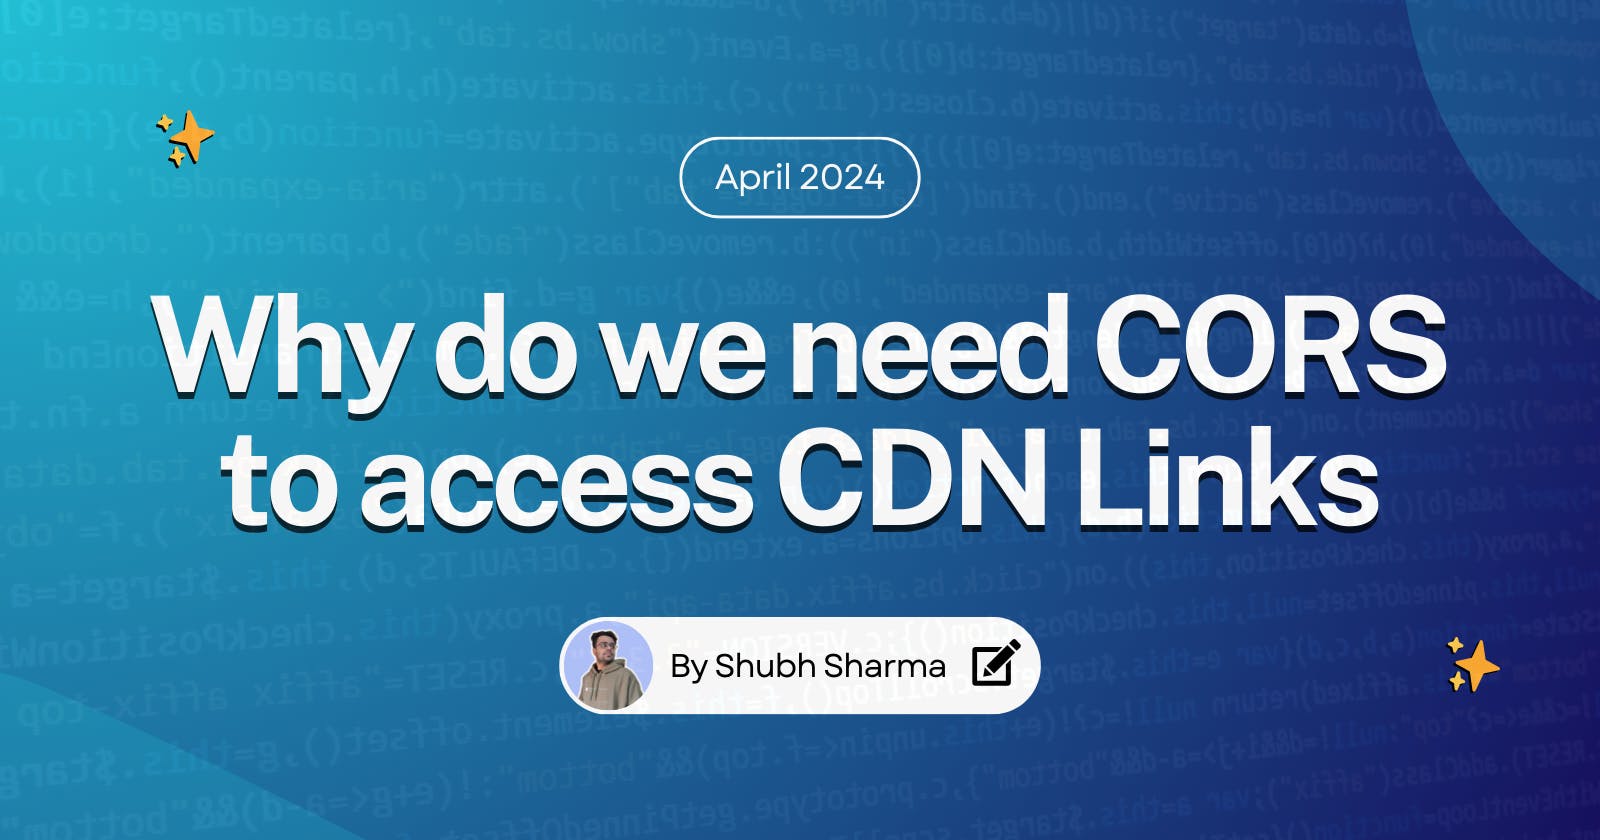 Why do we need CORS to access CDN links?